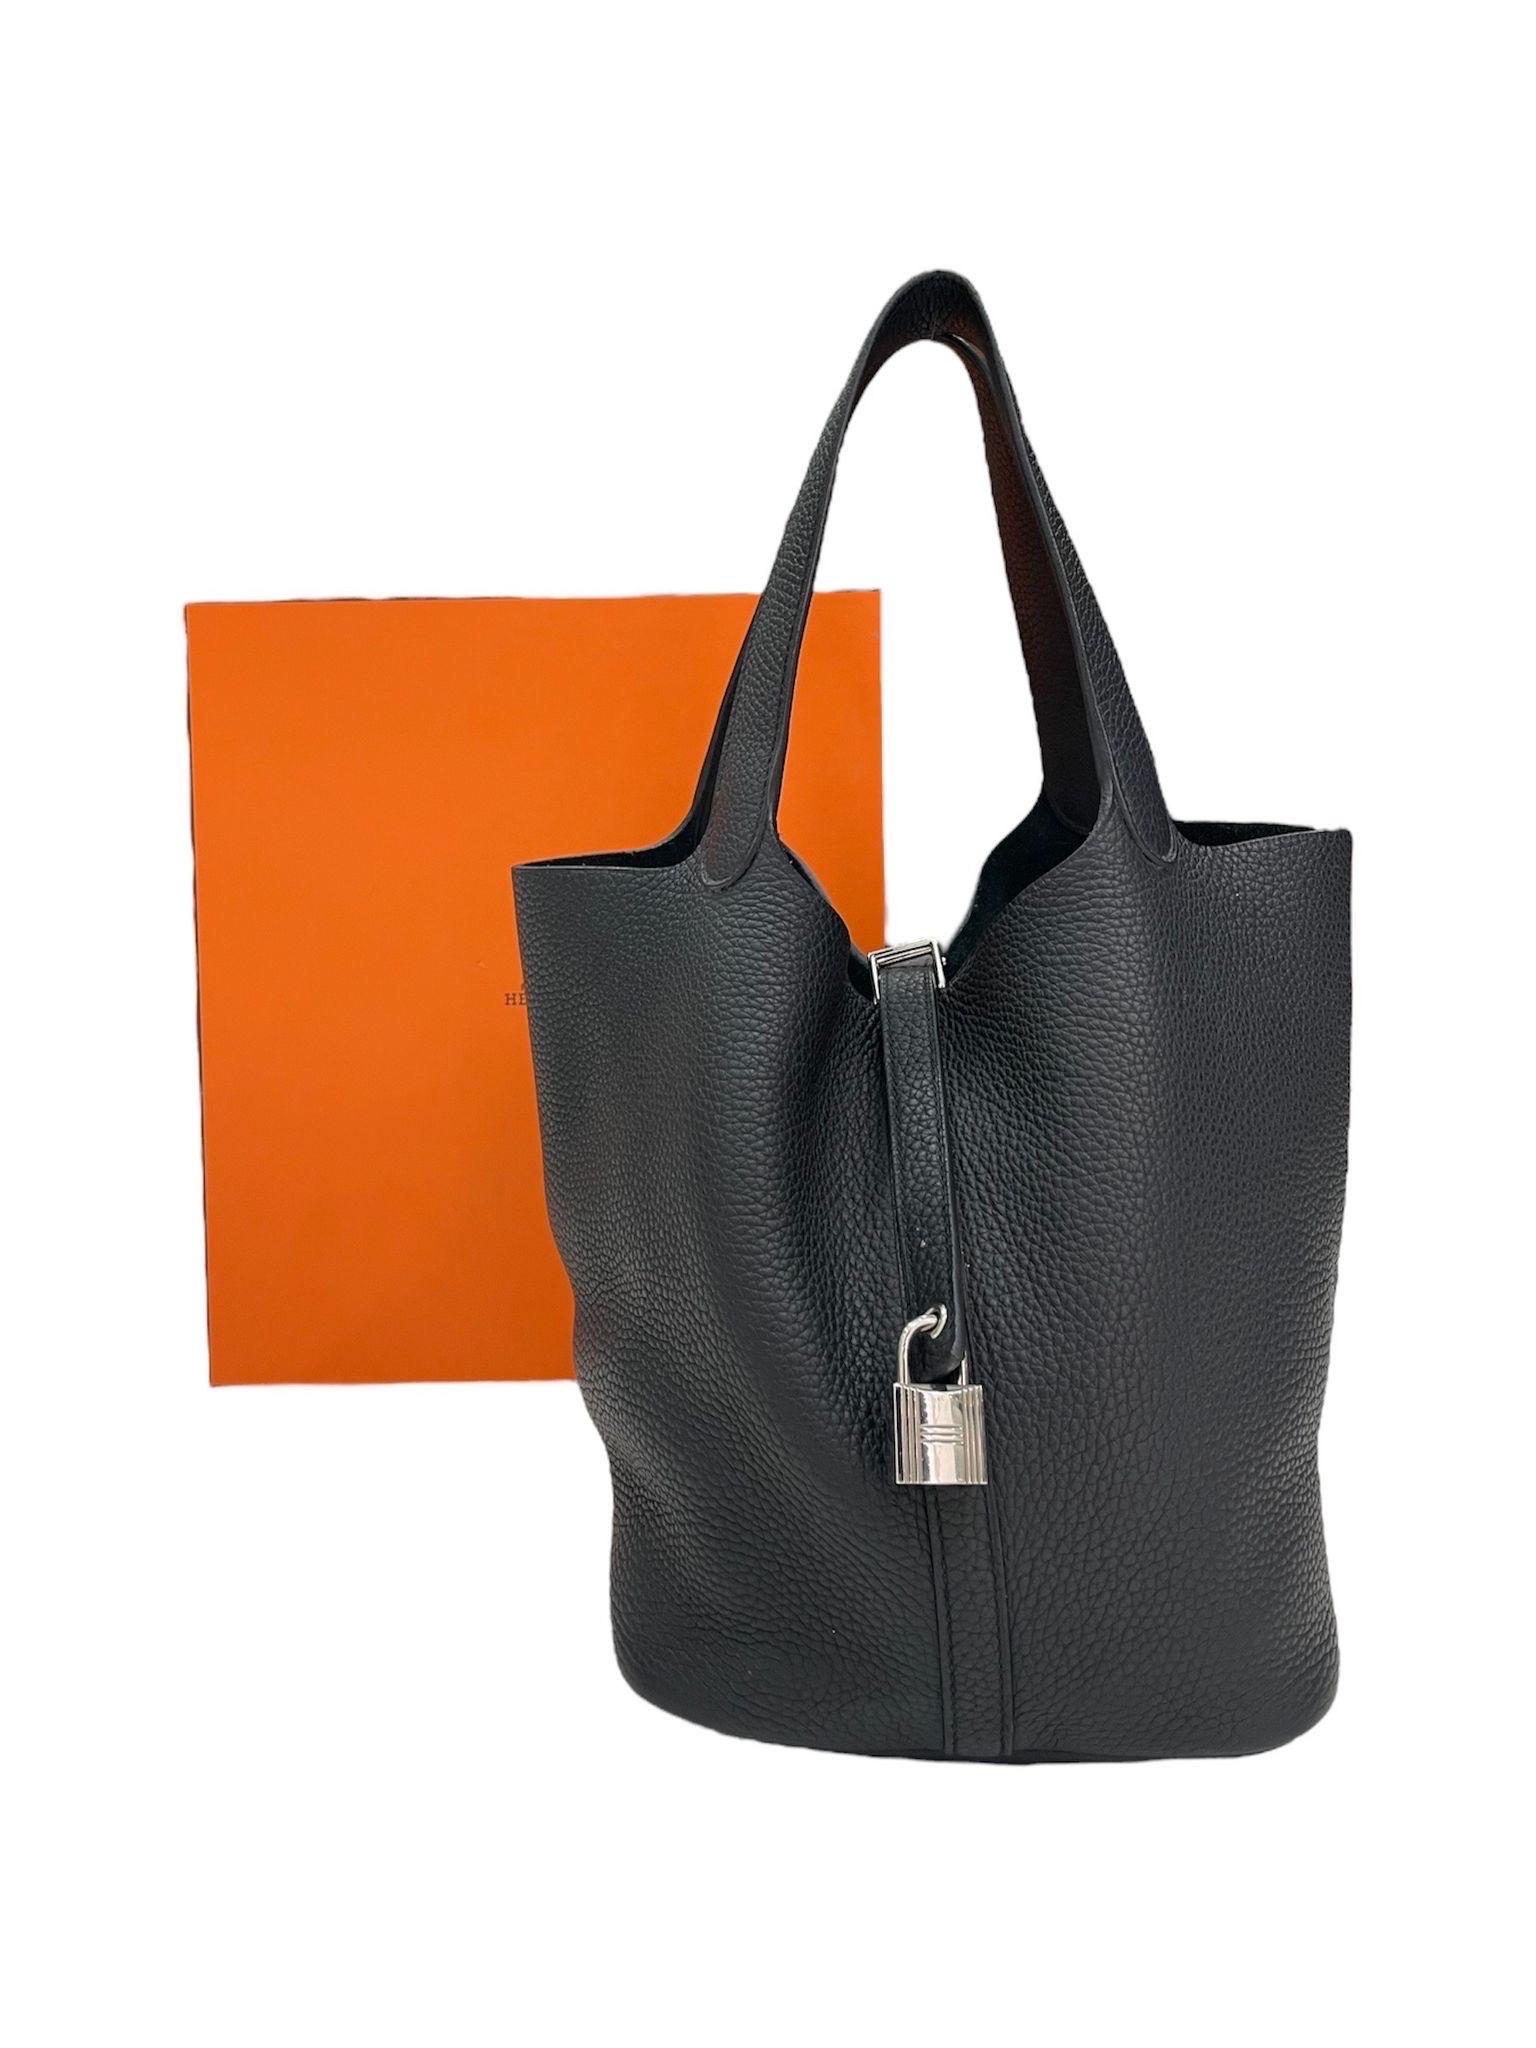 Bag signed Hermès, Picotin Lock model, size 22, made in Clemence leather, soft and textured to the touch, Plomb color with silver hardware. Equipped with a wide opening with central band and padlock. Equipped with a double leather handle for